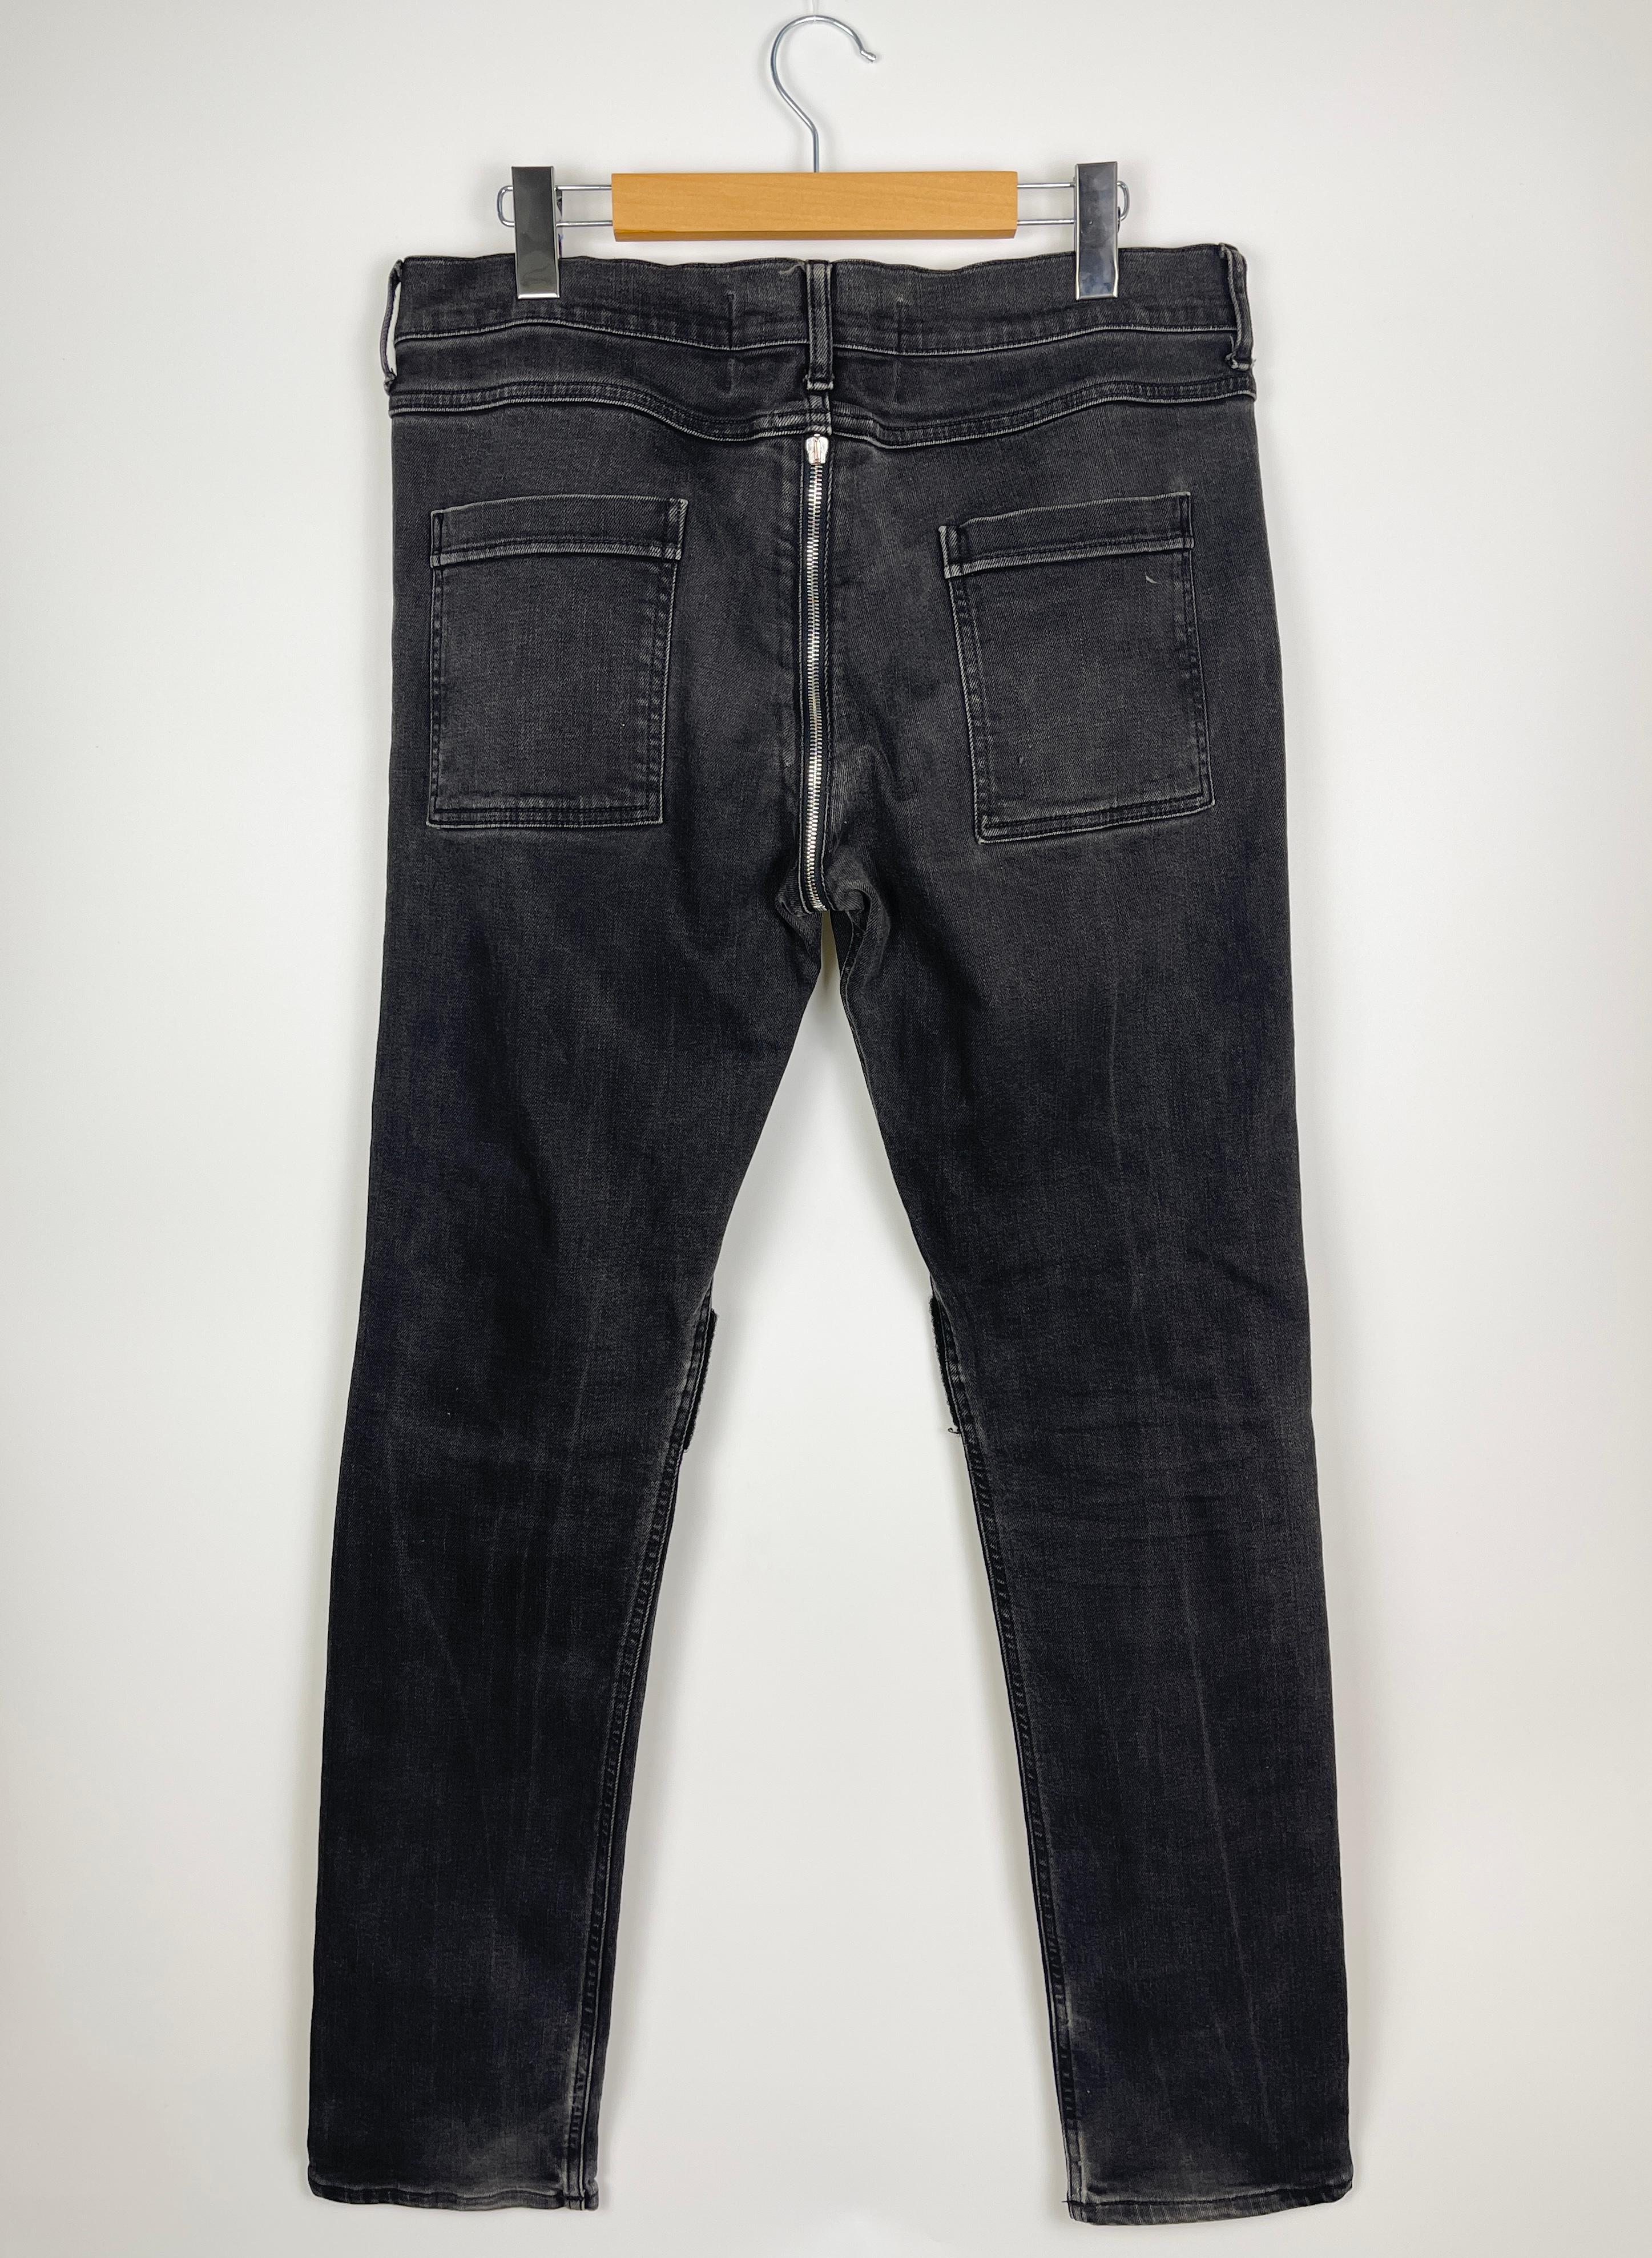 Hood By Air Taped Denim For Sale 2